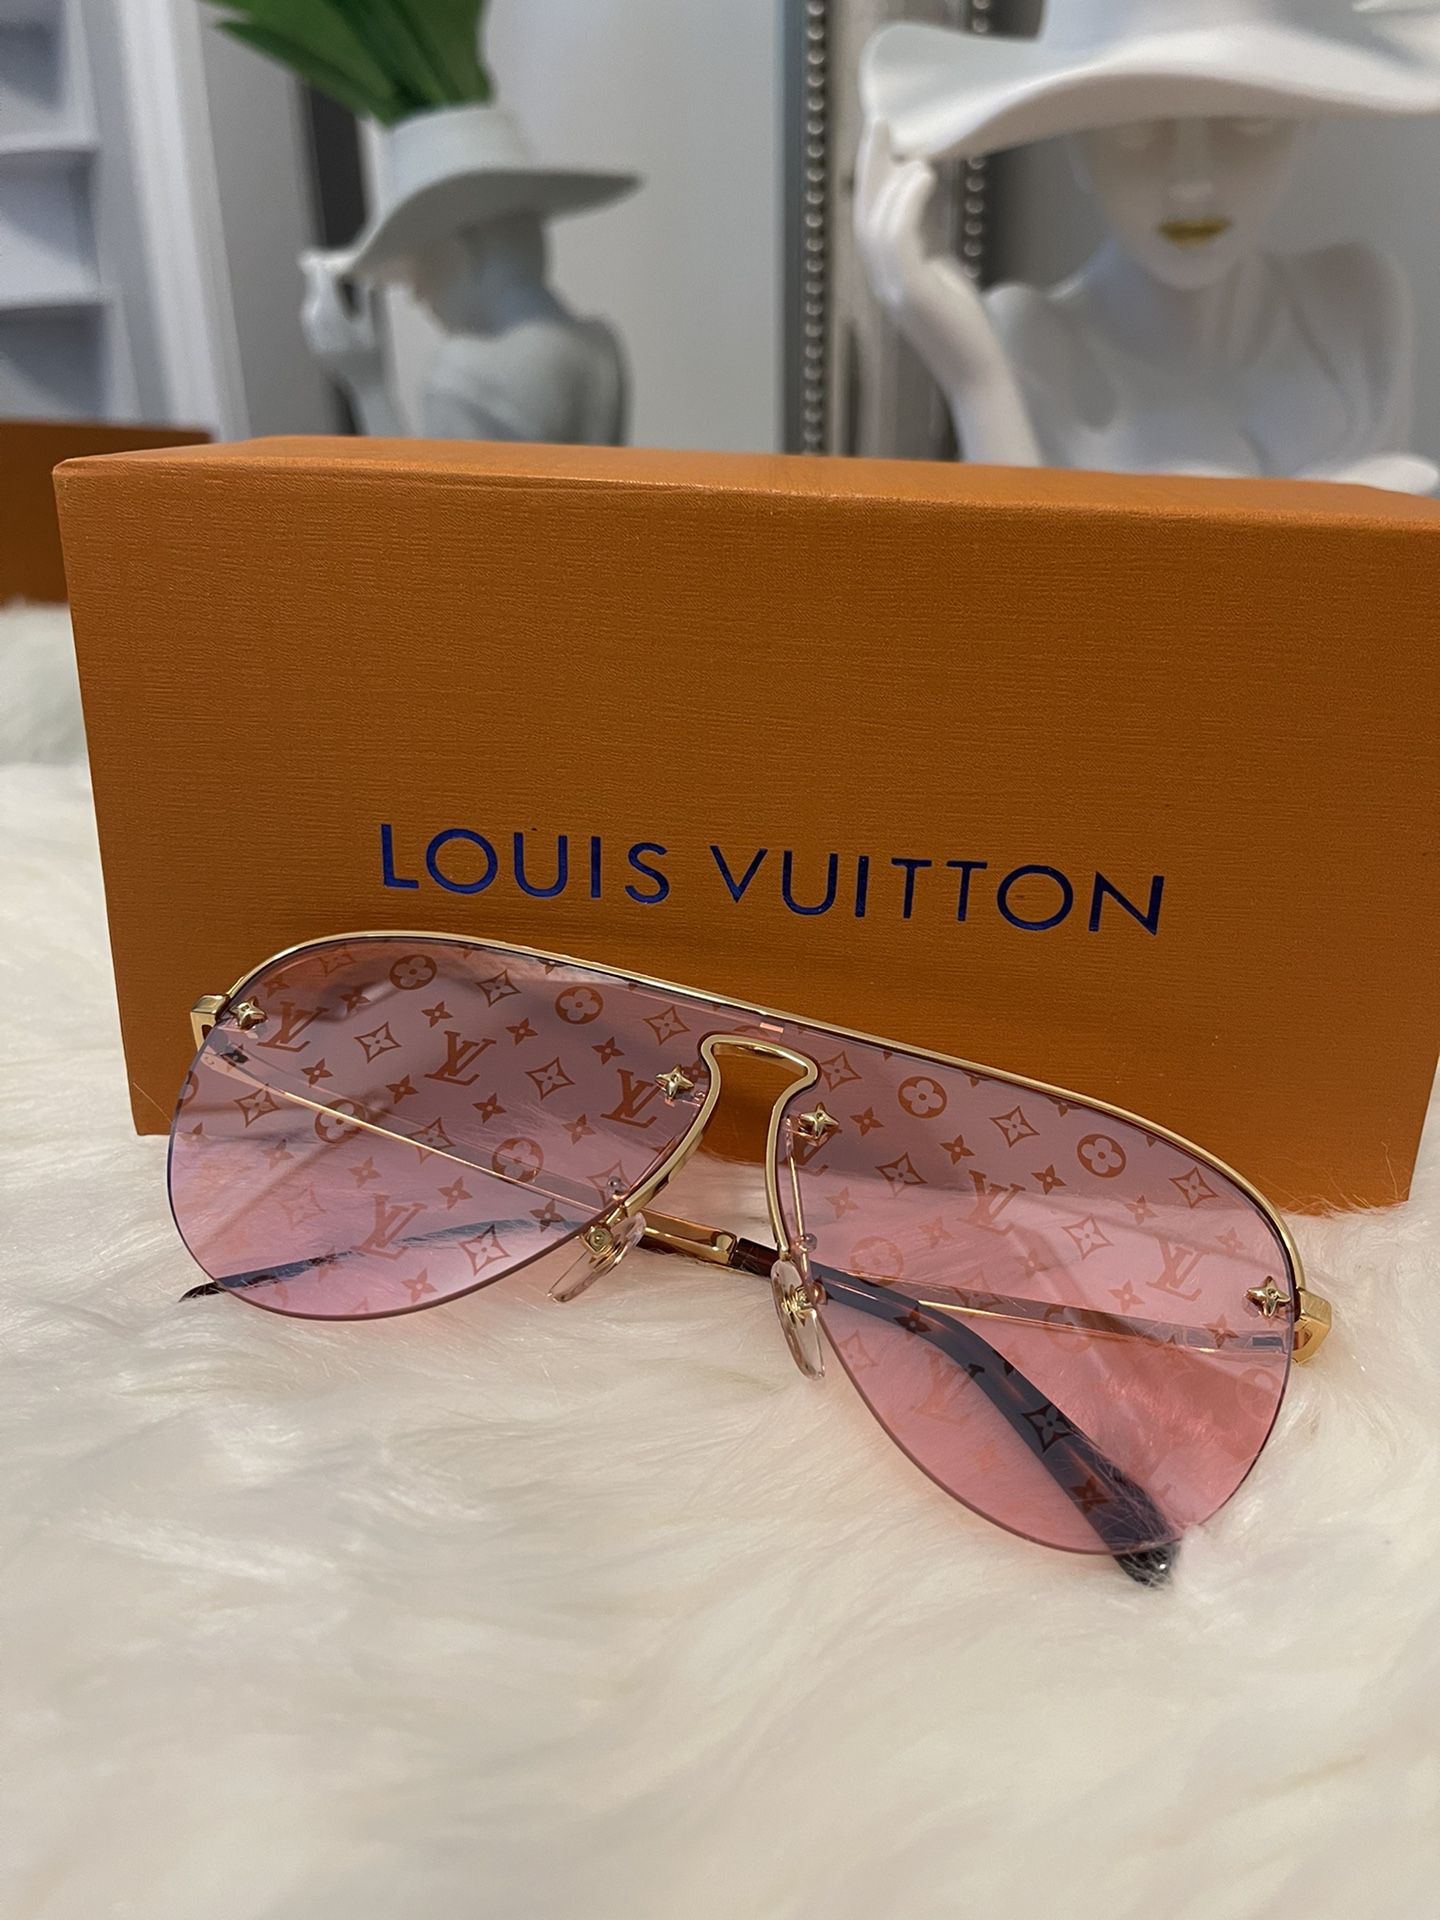 LOUIS VUITTON SUNGLASSES- Pink-woman for Sale in Bedford Hills, NY